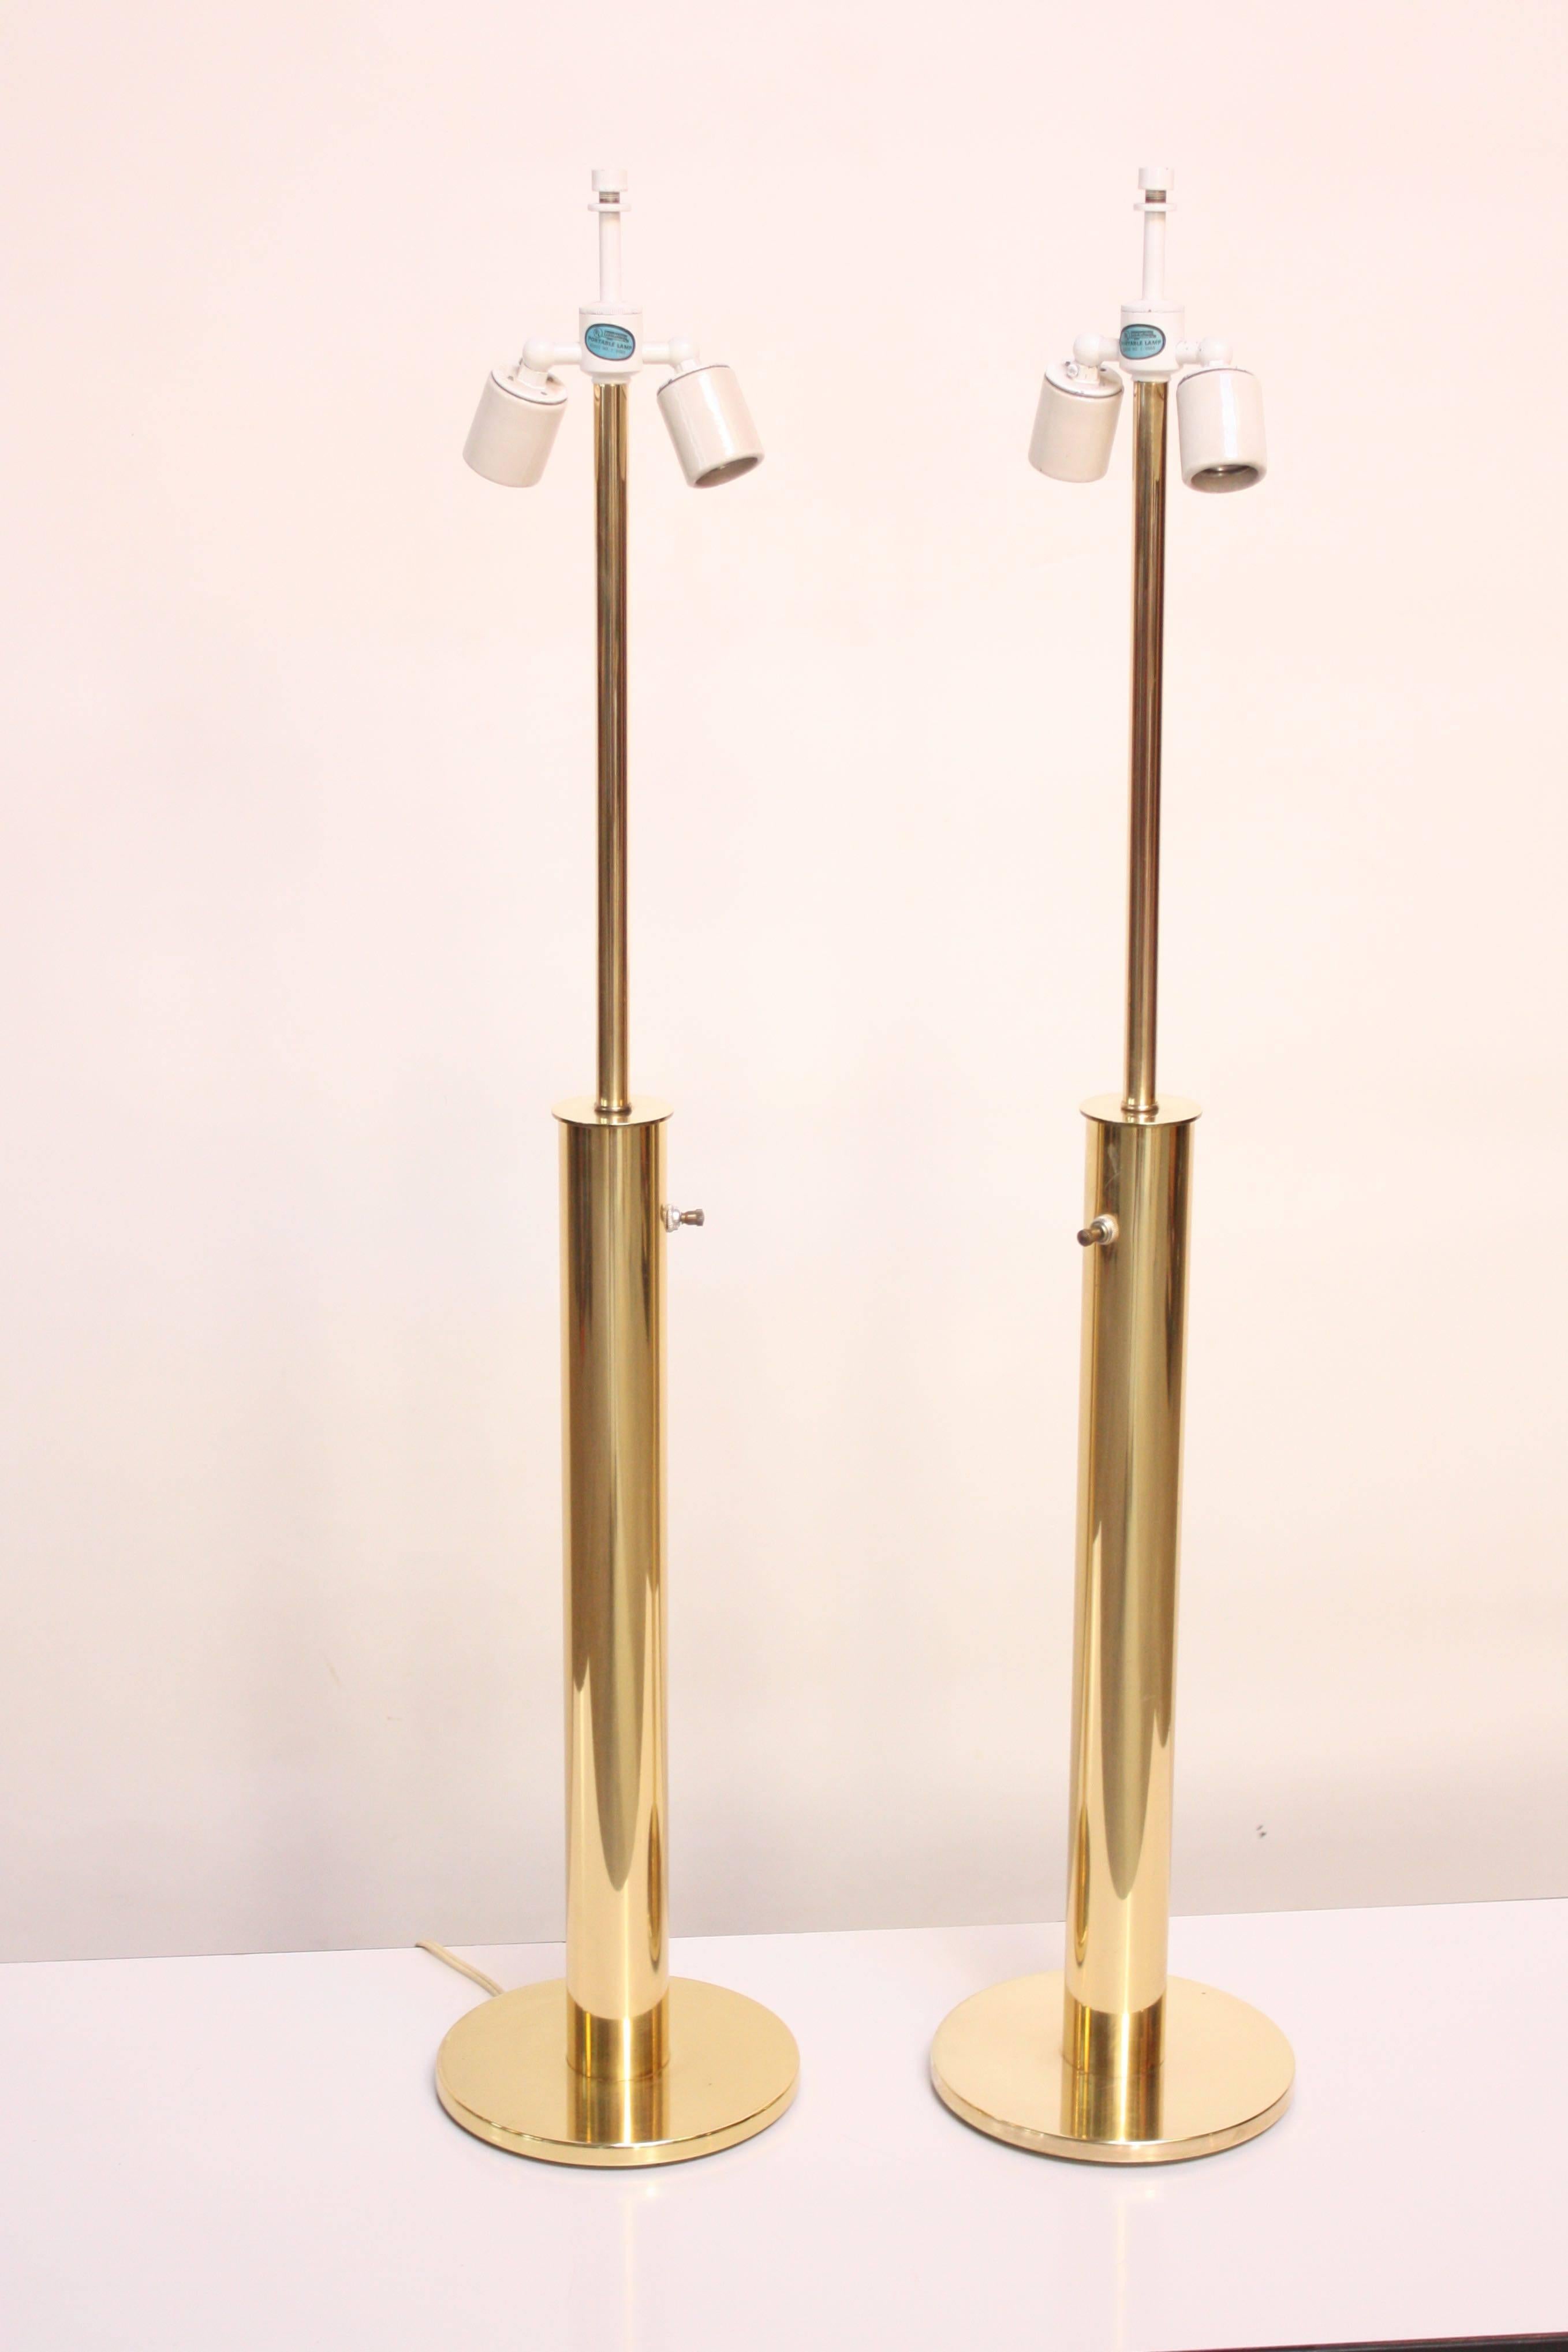 This pair of simple, yet glamorous table lamps are composed of elongated cylindrical stems connected to circular bases. Double porcelain sockets and original switch are intact, but the wiring is new. Brass has been perfectly polished and shows no